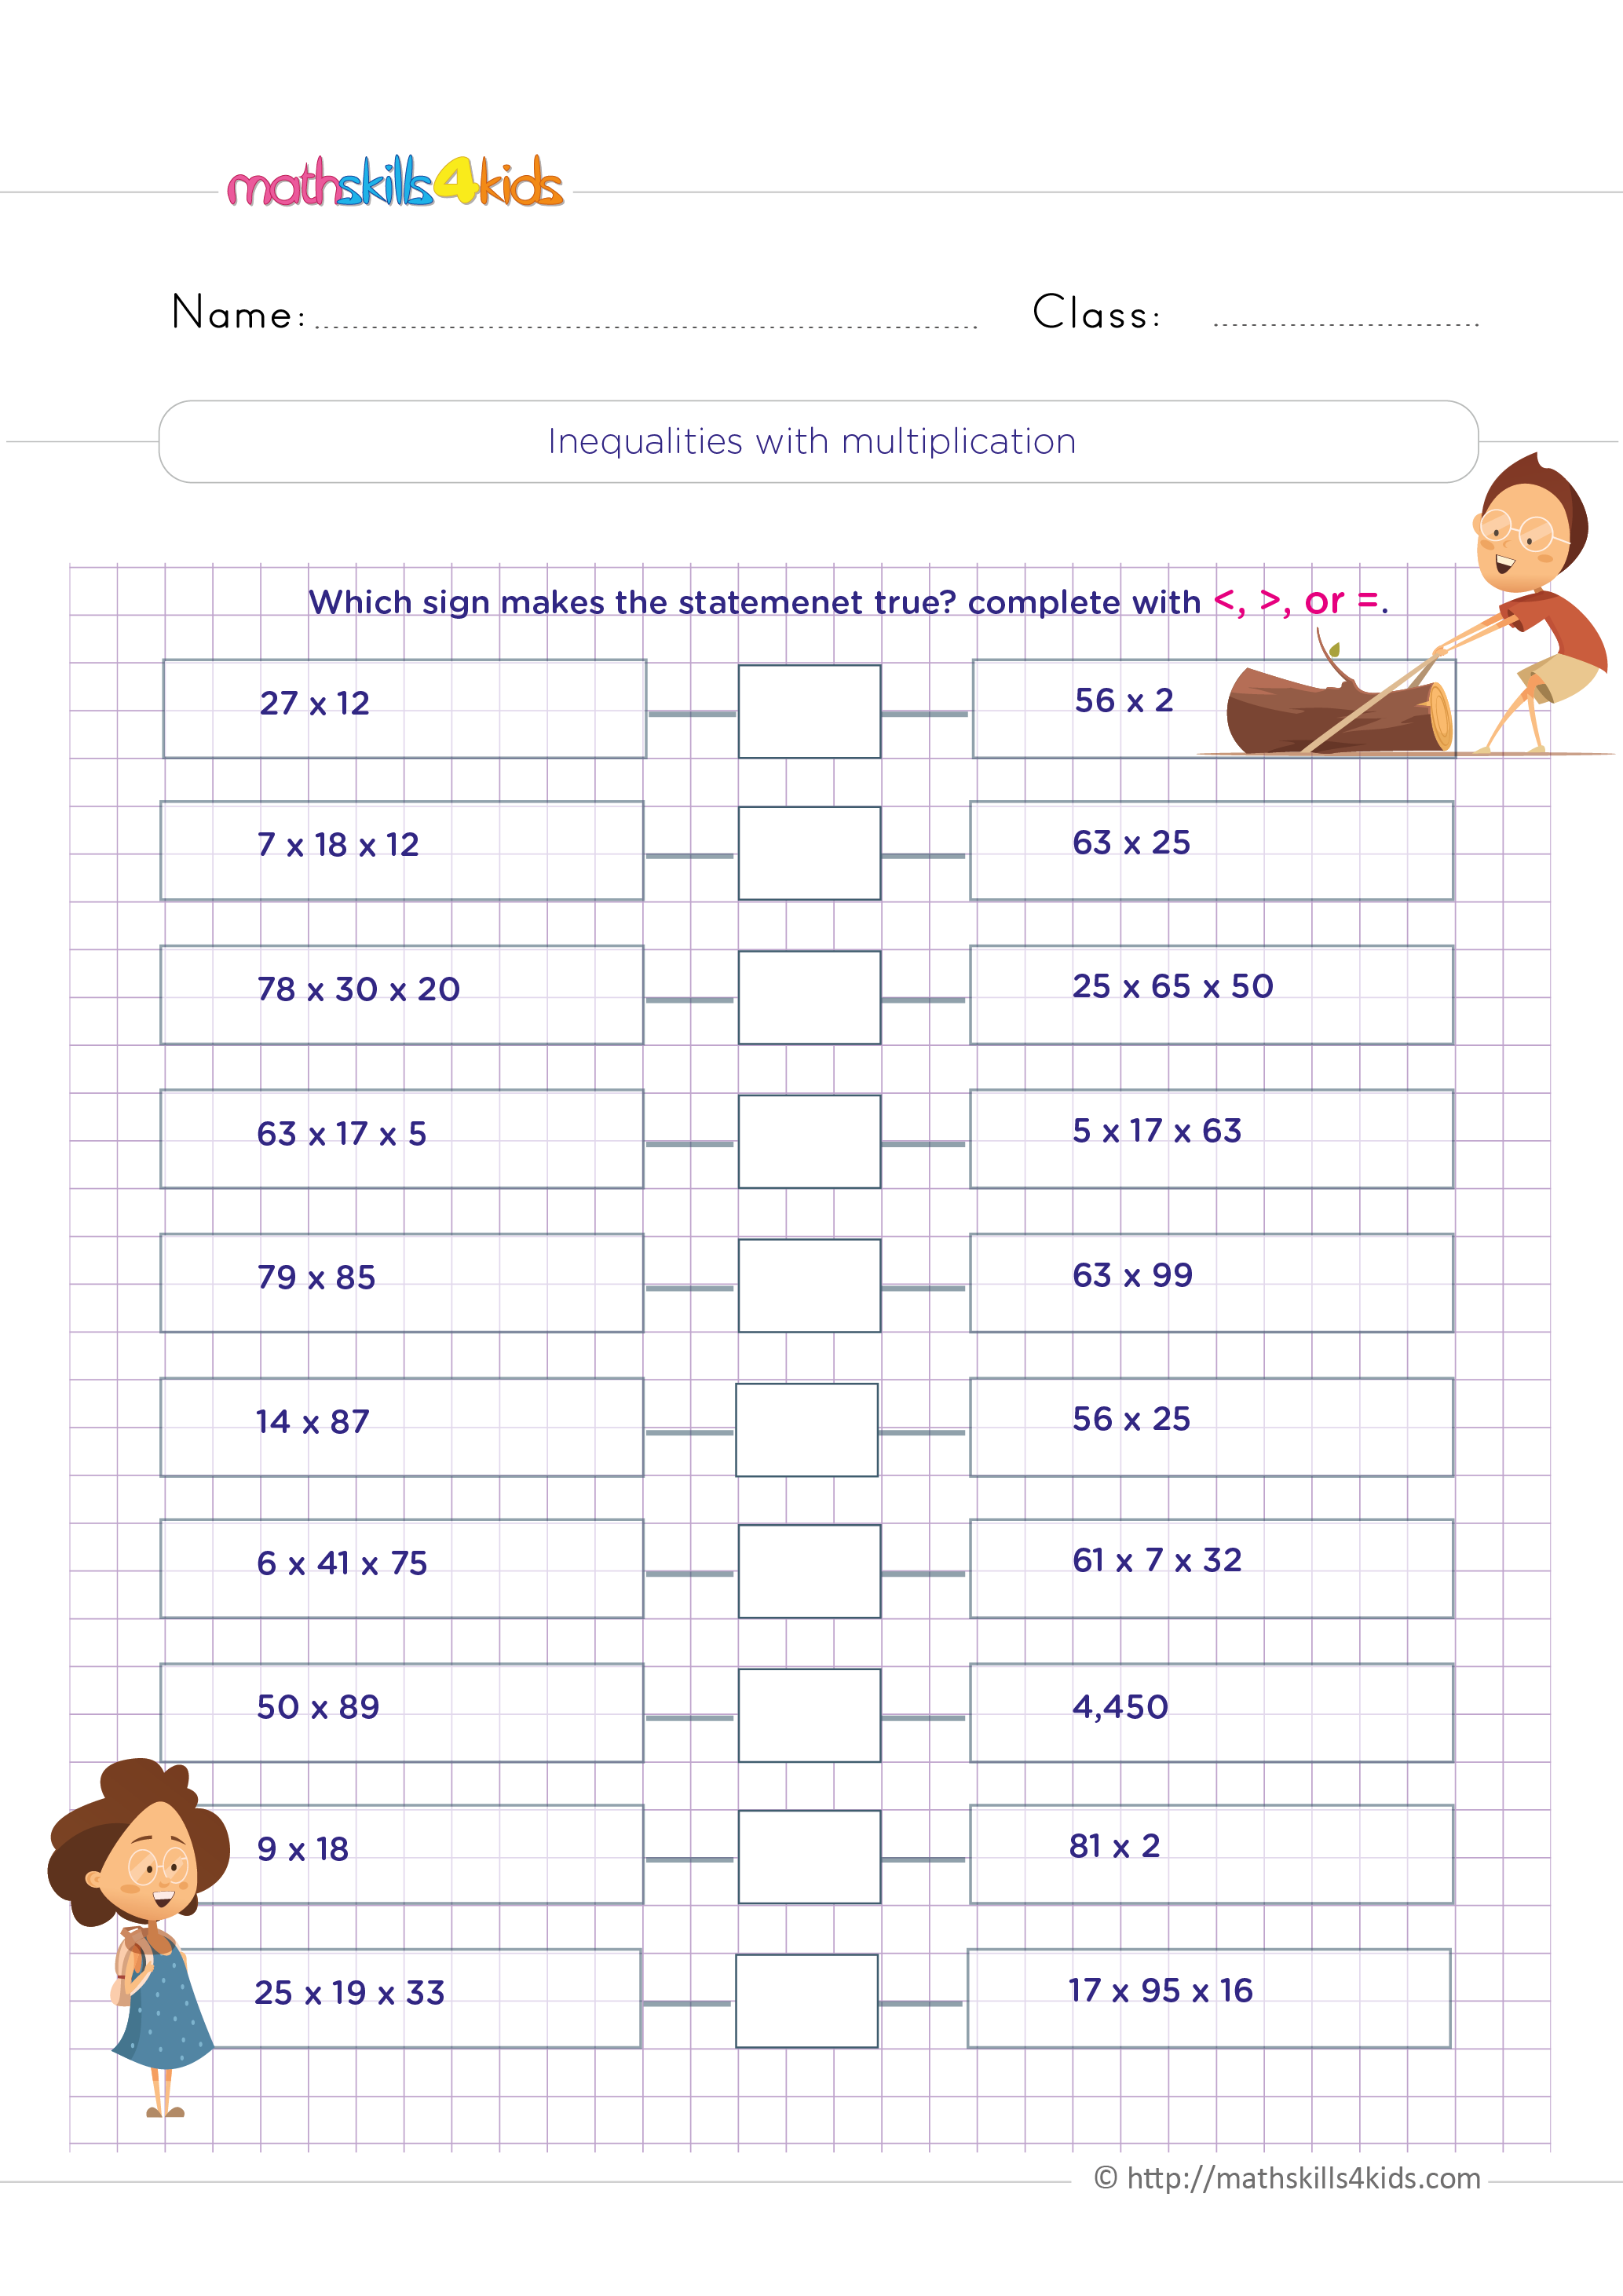 4th Grade multiplication worksheets with answers - How to solve inequalities with multiplication